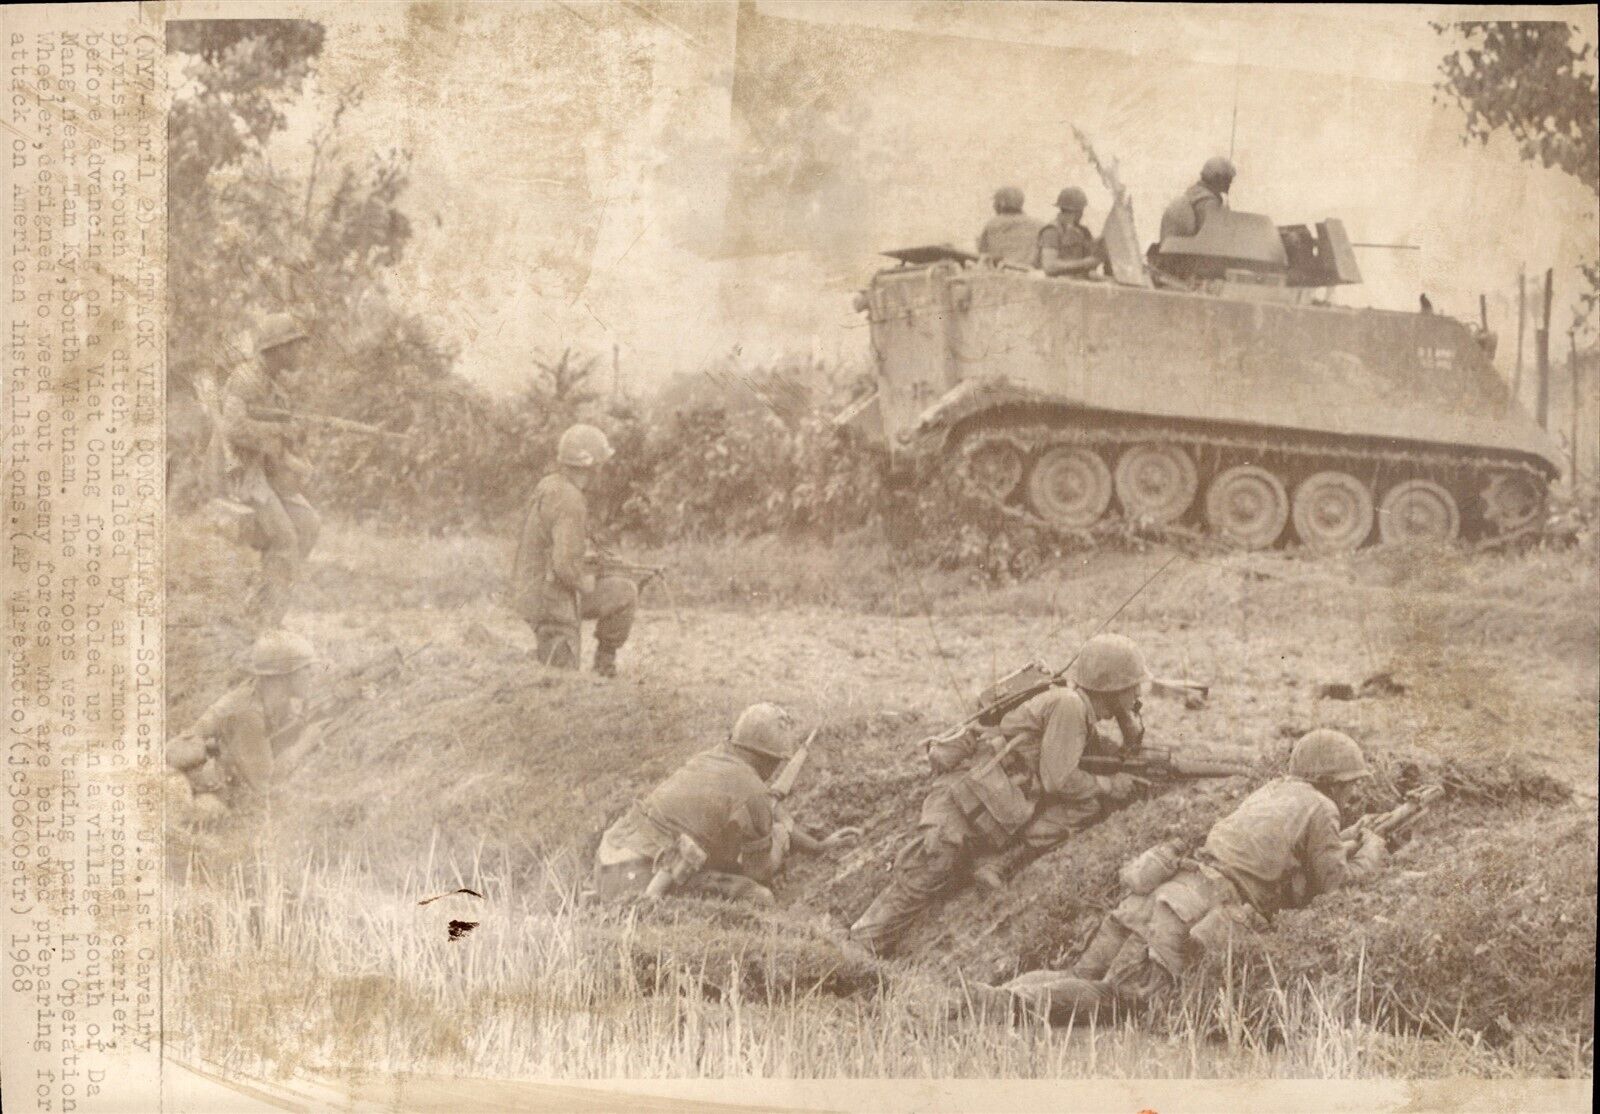 LG20 1968 Wire Photo US 1ST CAVALRY SOLDIERS VIETNAM WAR ARMED PERSONNEL CARRIER